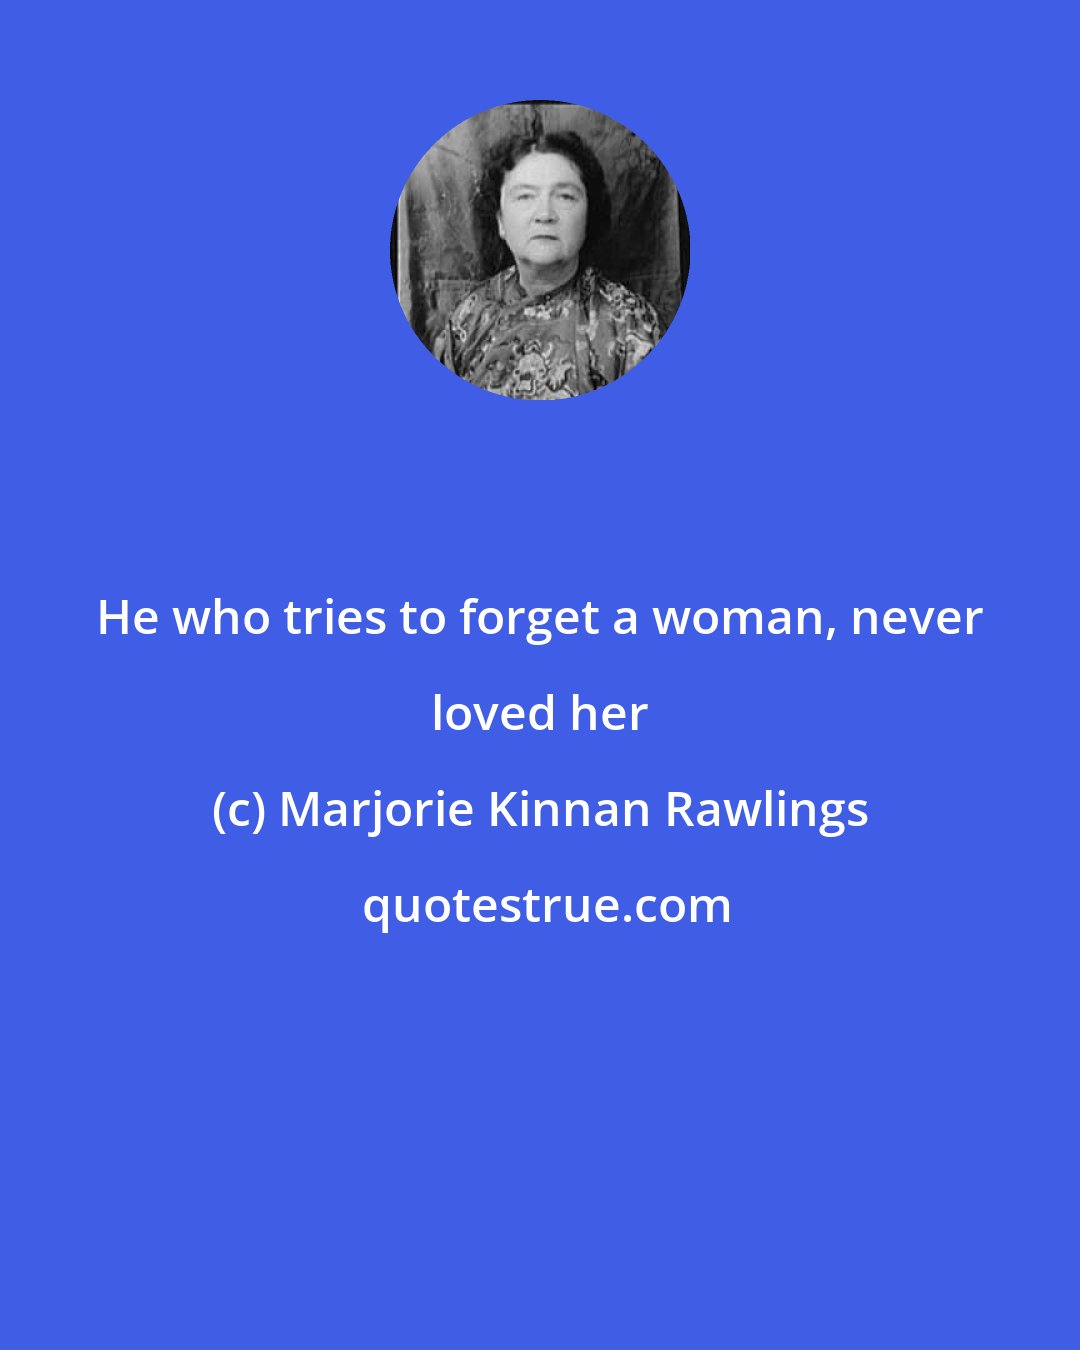 Marjorie Kinnan Rawlings: He who tries to forget a woman, never loved her